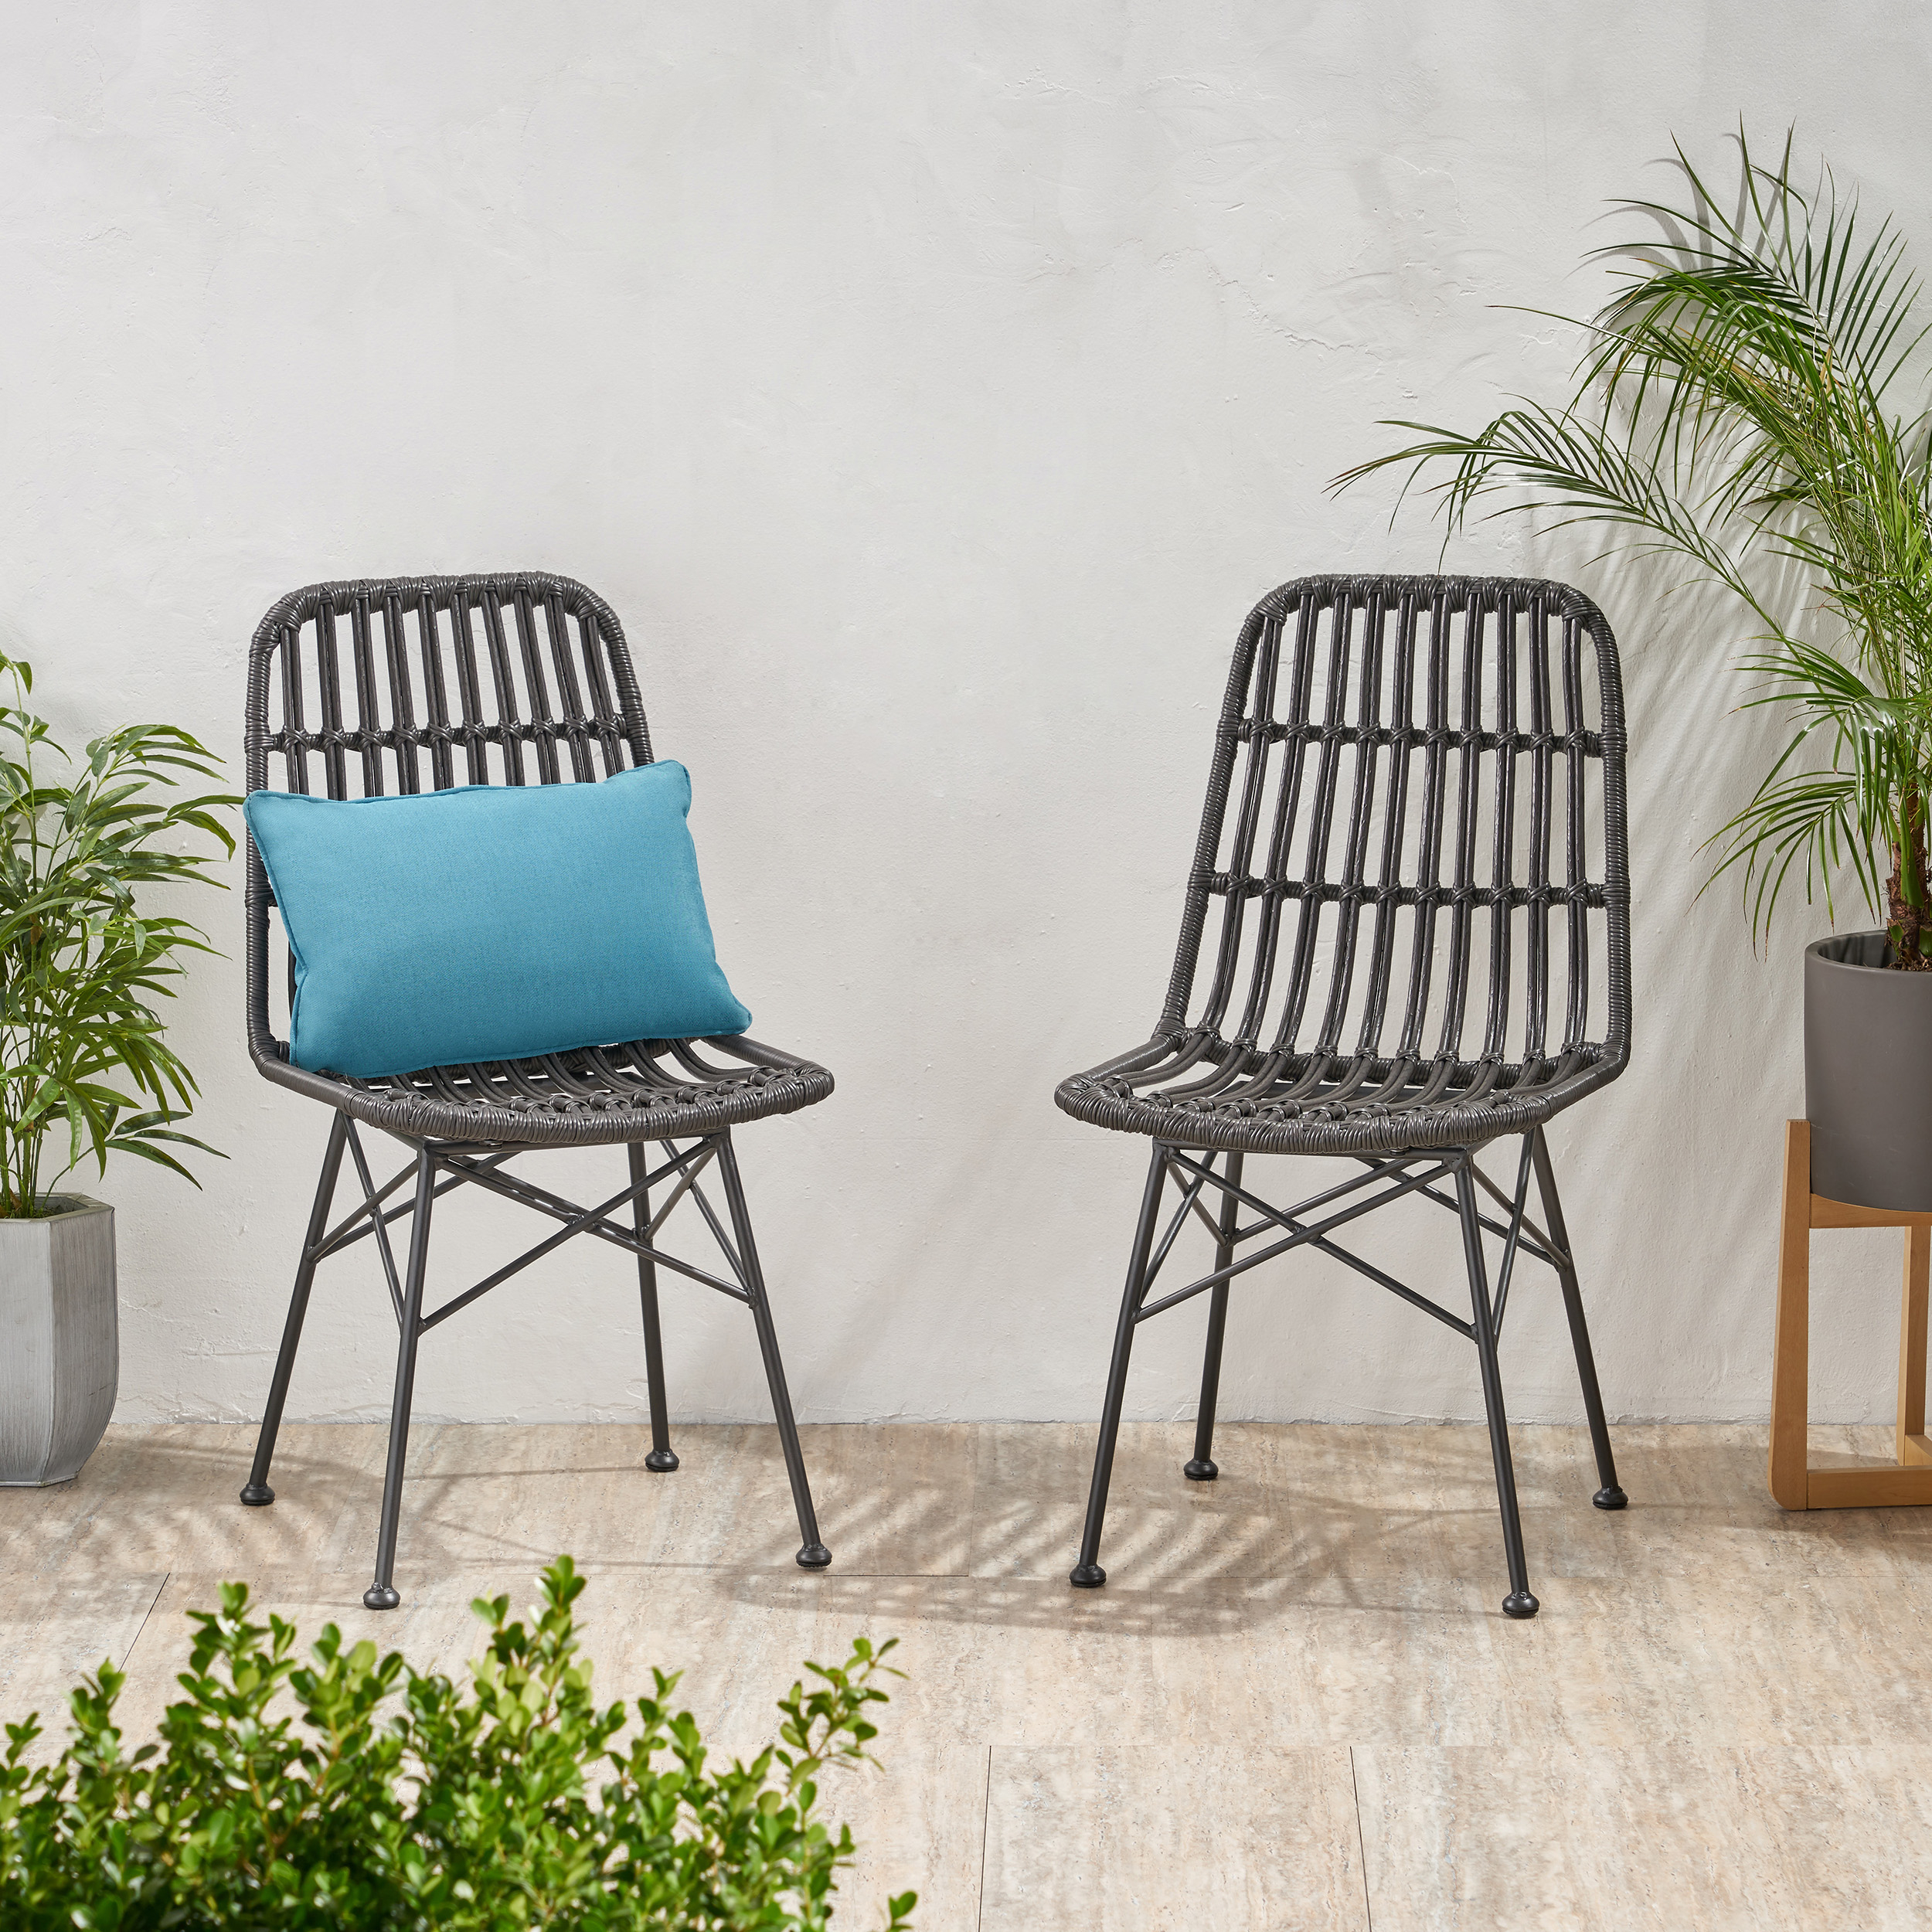 Yilia Outdoor Wicker Dining Chairs (Set Of 2) - Gray, Black